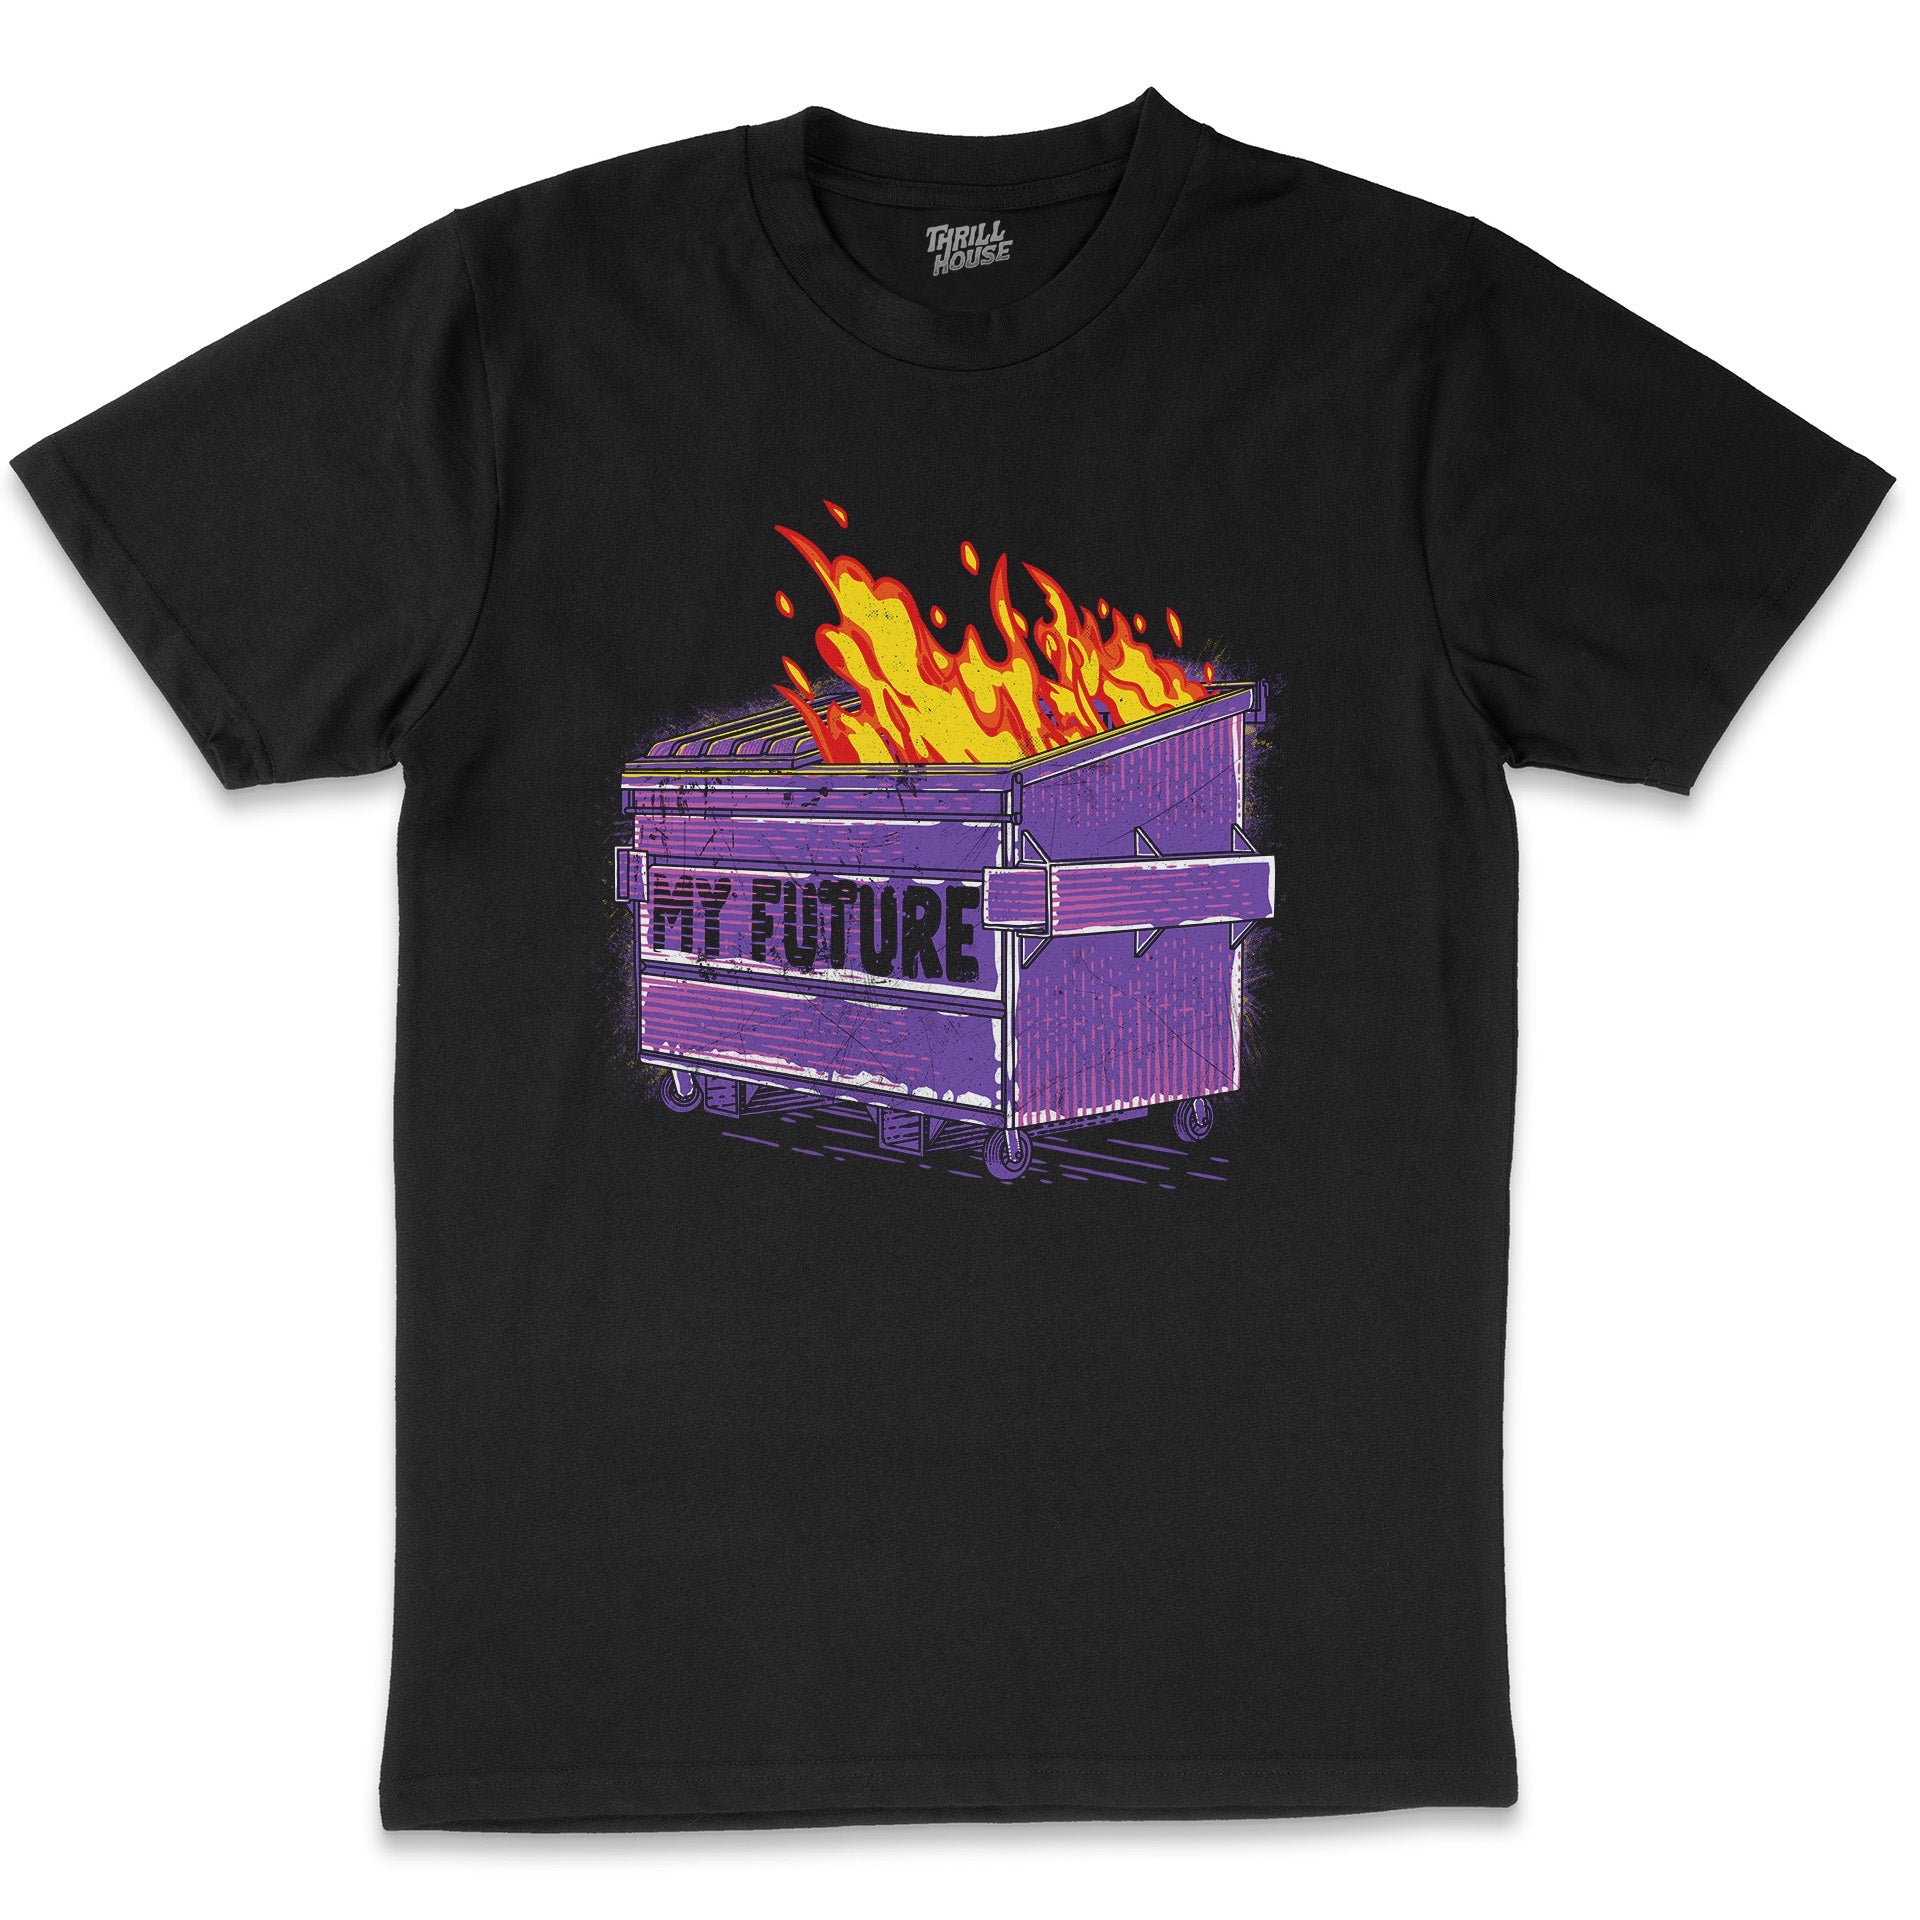 My Future Funny Dumpster Fire Anxiety Life Sucks Parody Disaster Mess Cotton T-Shirt